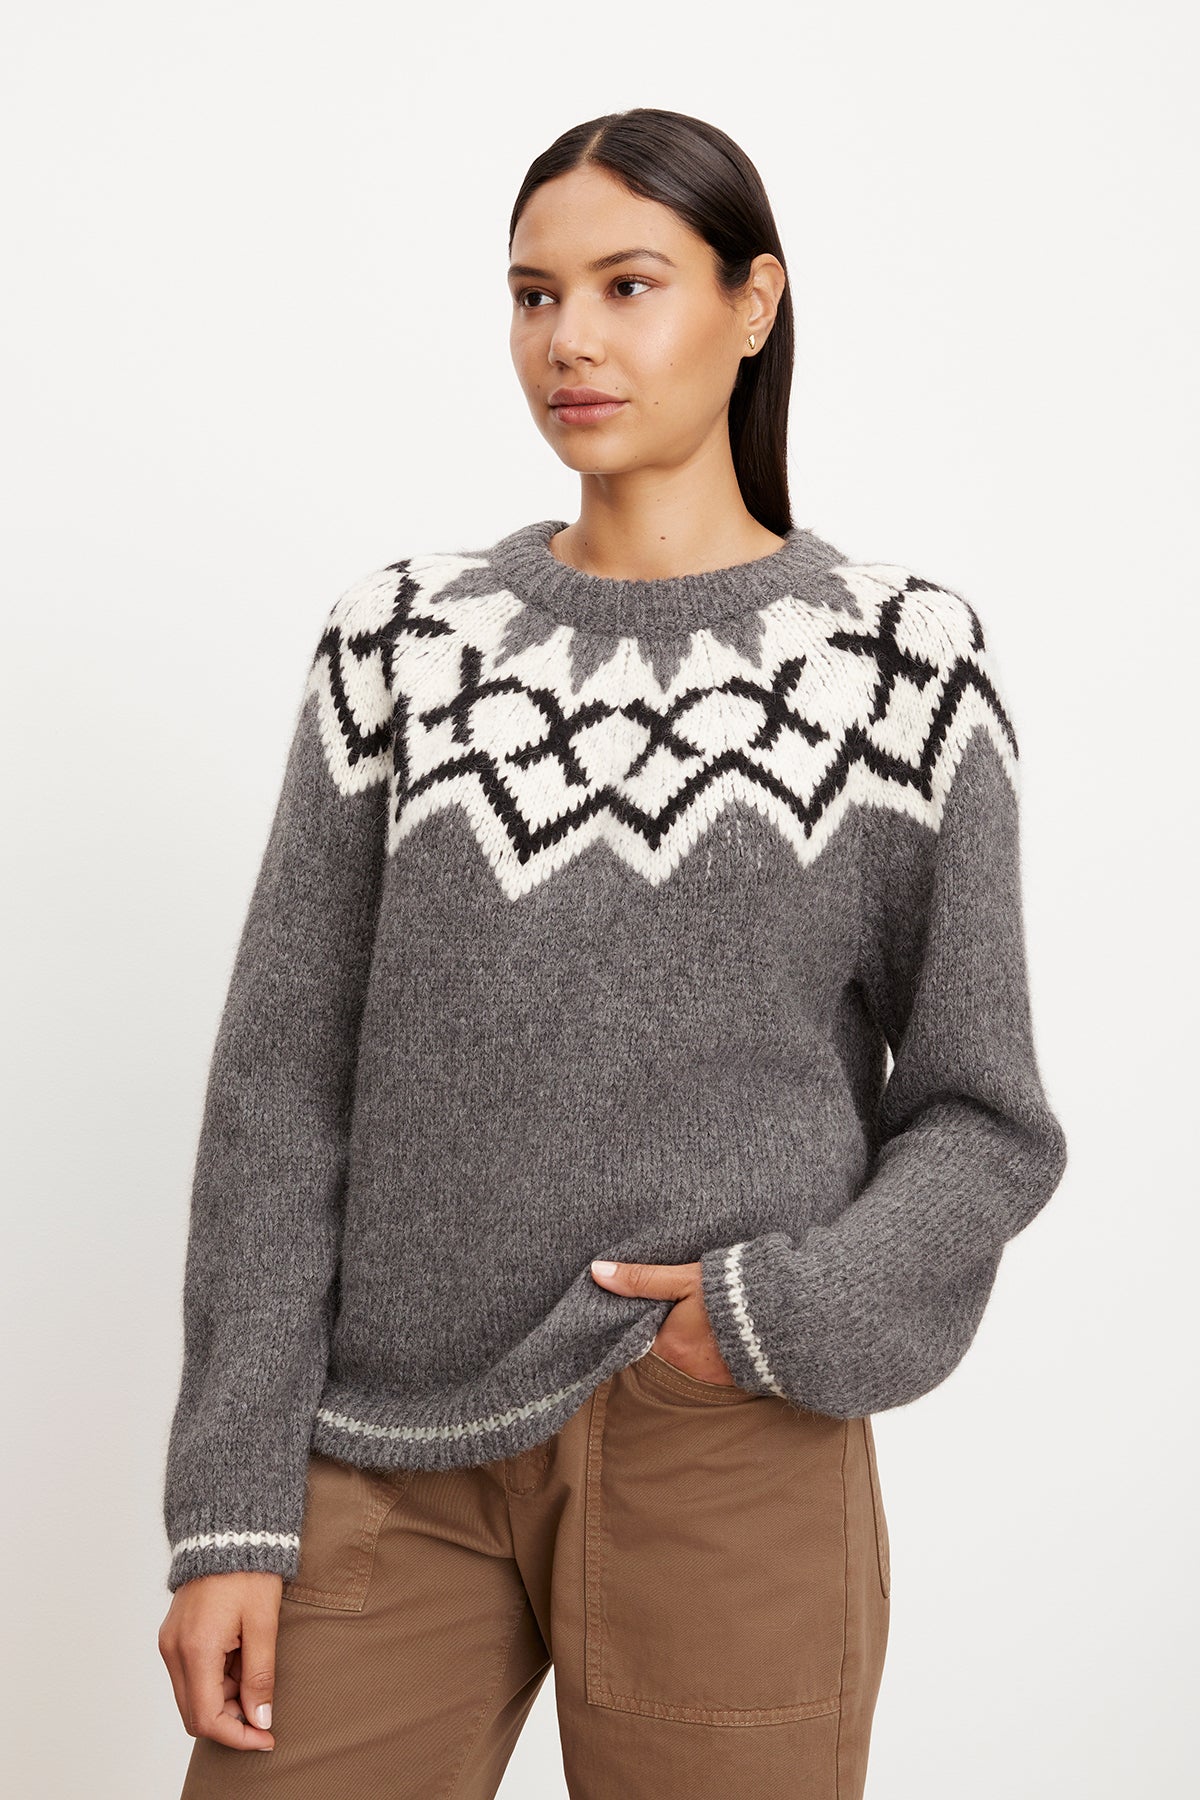 A woman wearing a Velvet by Graham & Spencer ALEXA FAIR ISLE CREW NECK SWEATER with a fair isle design pattern.-35572030243009